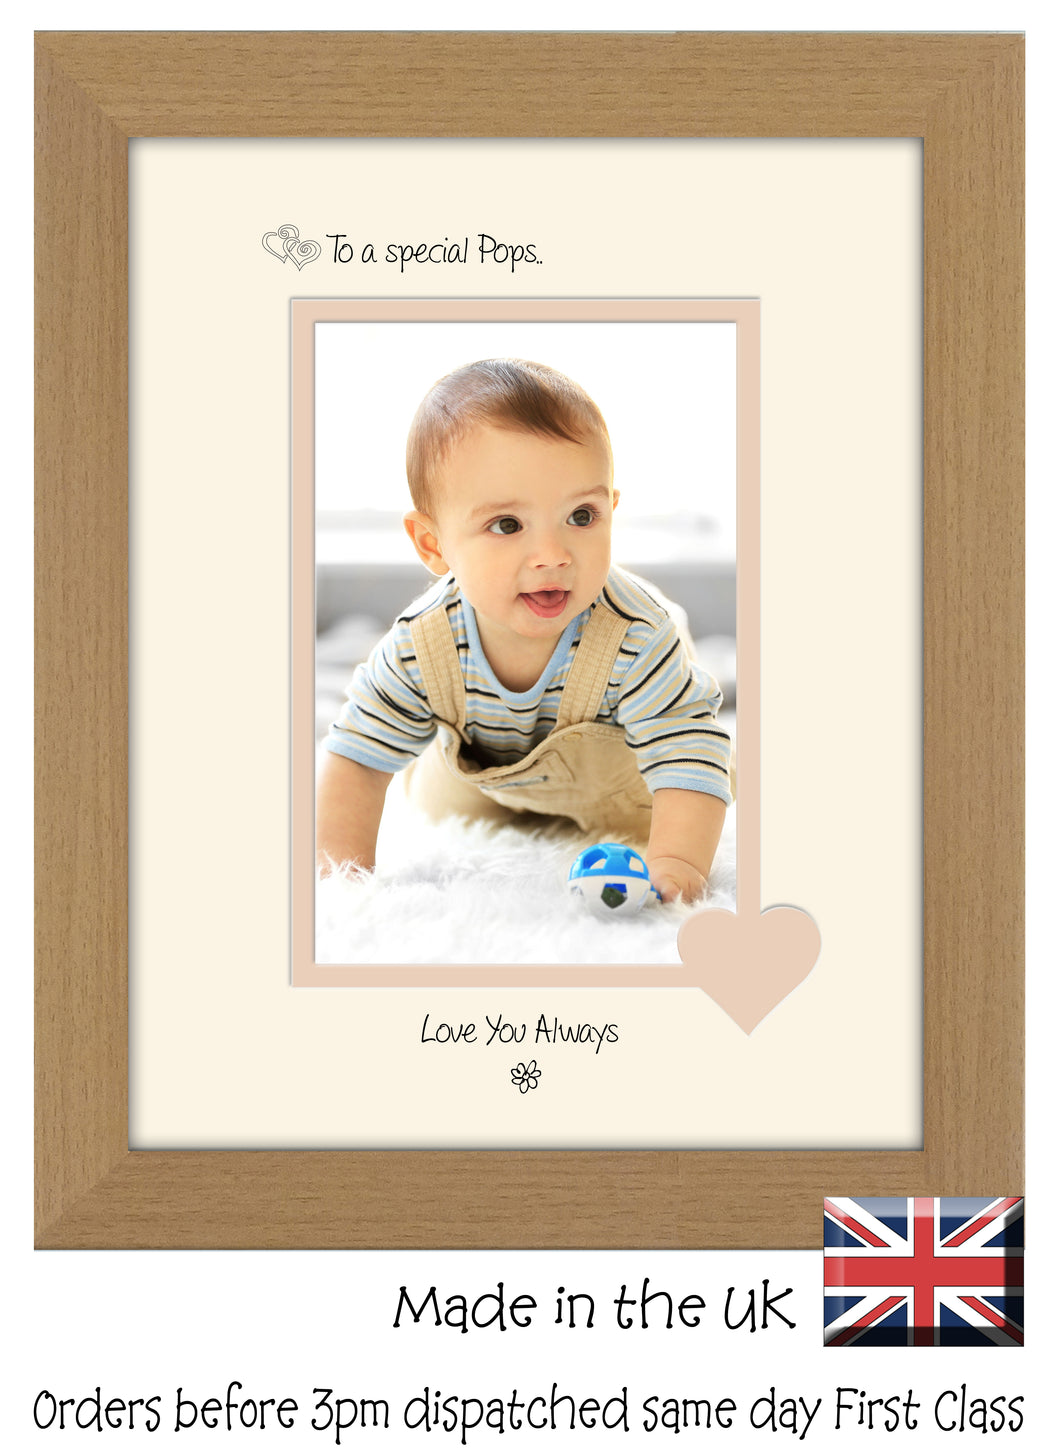 Pops Photo Frame - To a Special Pops ... Love you Always Portrait photo frame 6